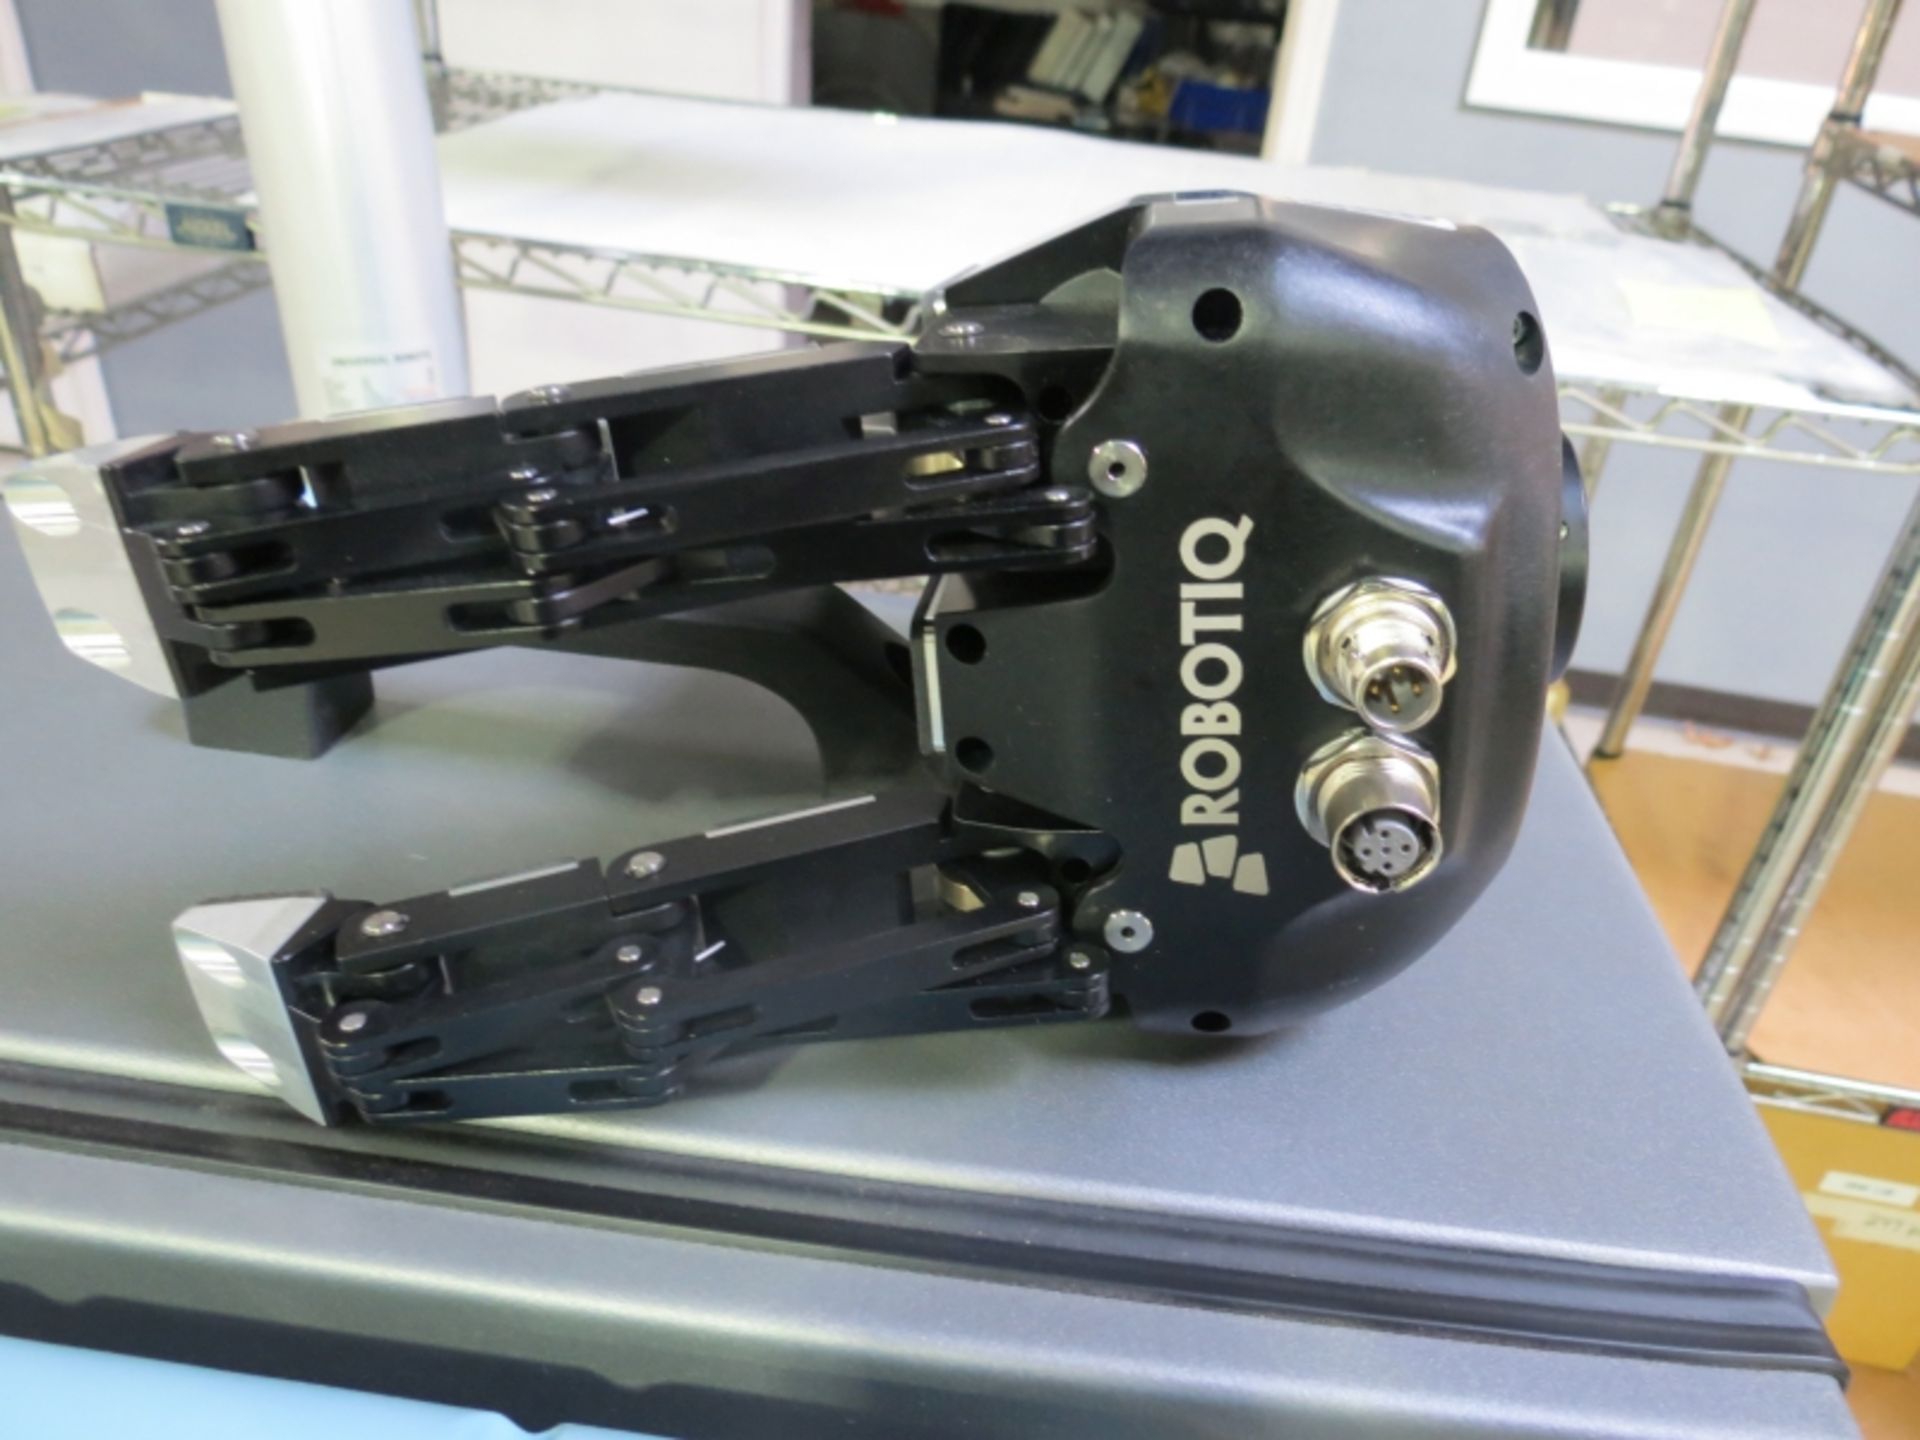 Universal Robots with Gripper Arm UR5 Max Payload 5KG *Over $40,000 new* *NEVER USED FOR PRODUCTION* - Image 4 of 6